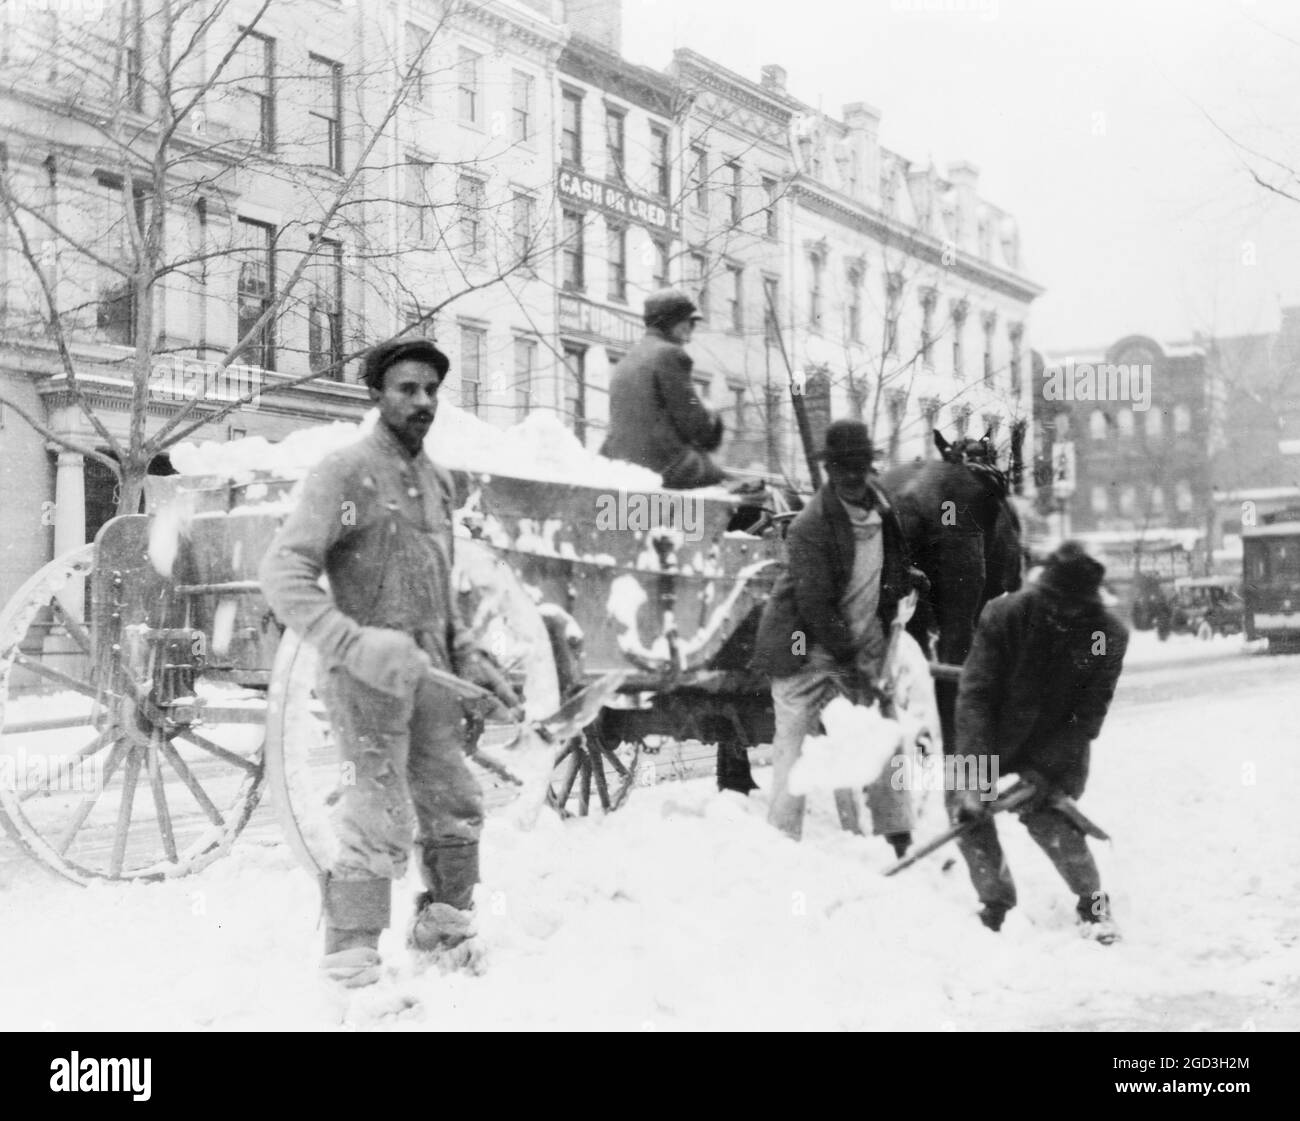 Men loading snow onto wagon, after snow storm, in Washington, D.C. ca. [between 1909 and 1920] Stock Photo